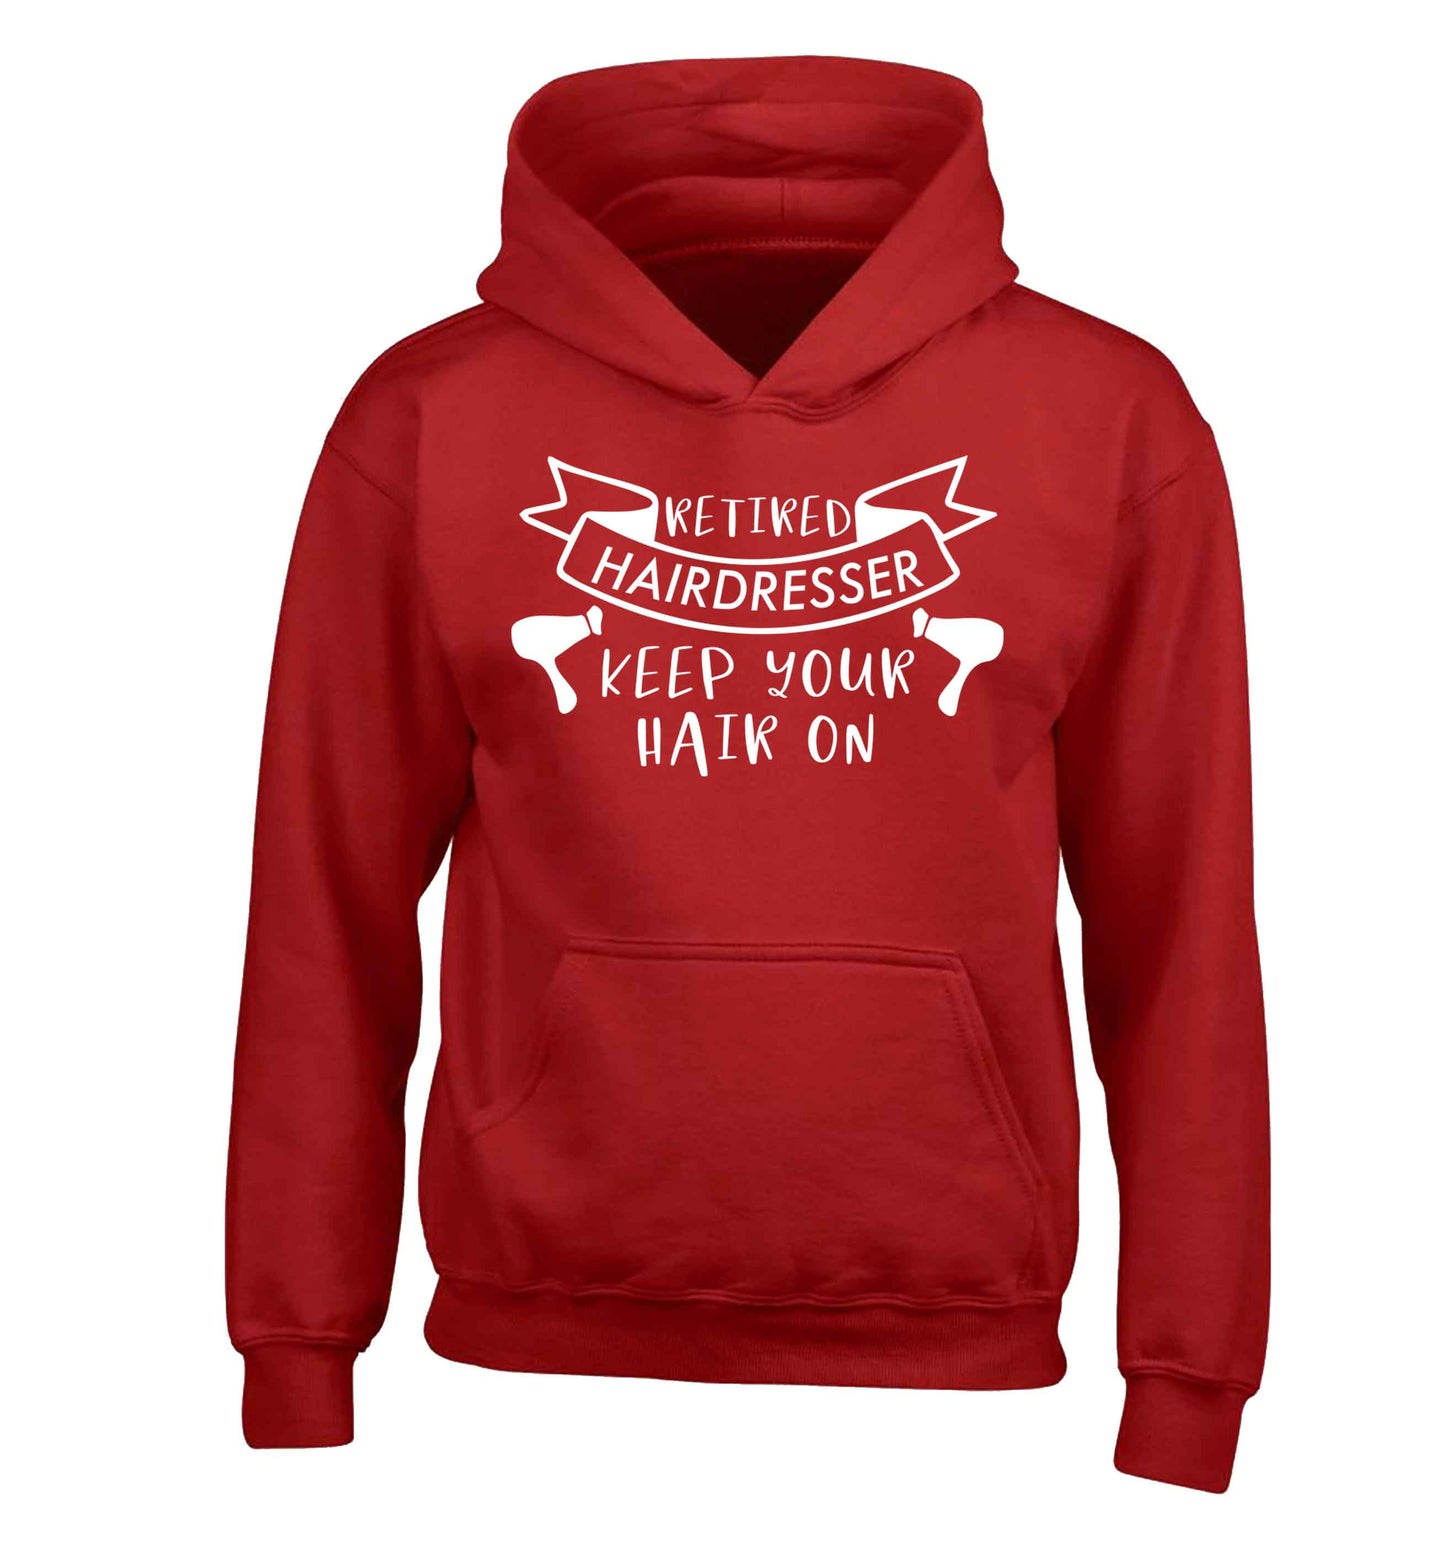 Retired hairdresser keep your hair on children's red hoodie 12-13 Years